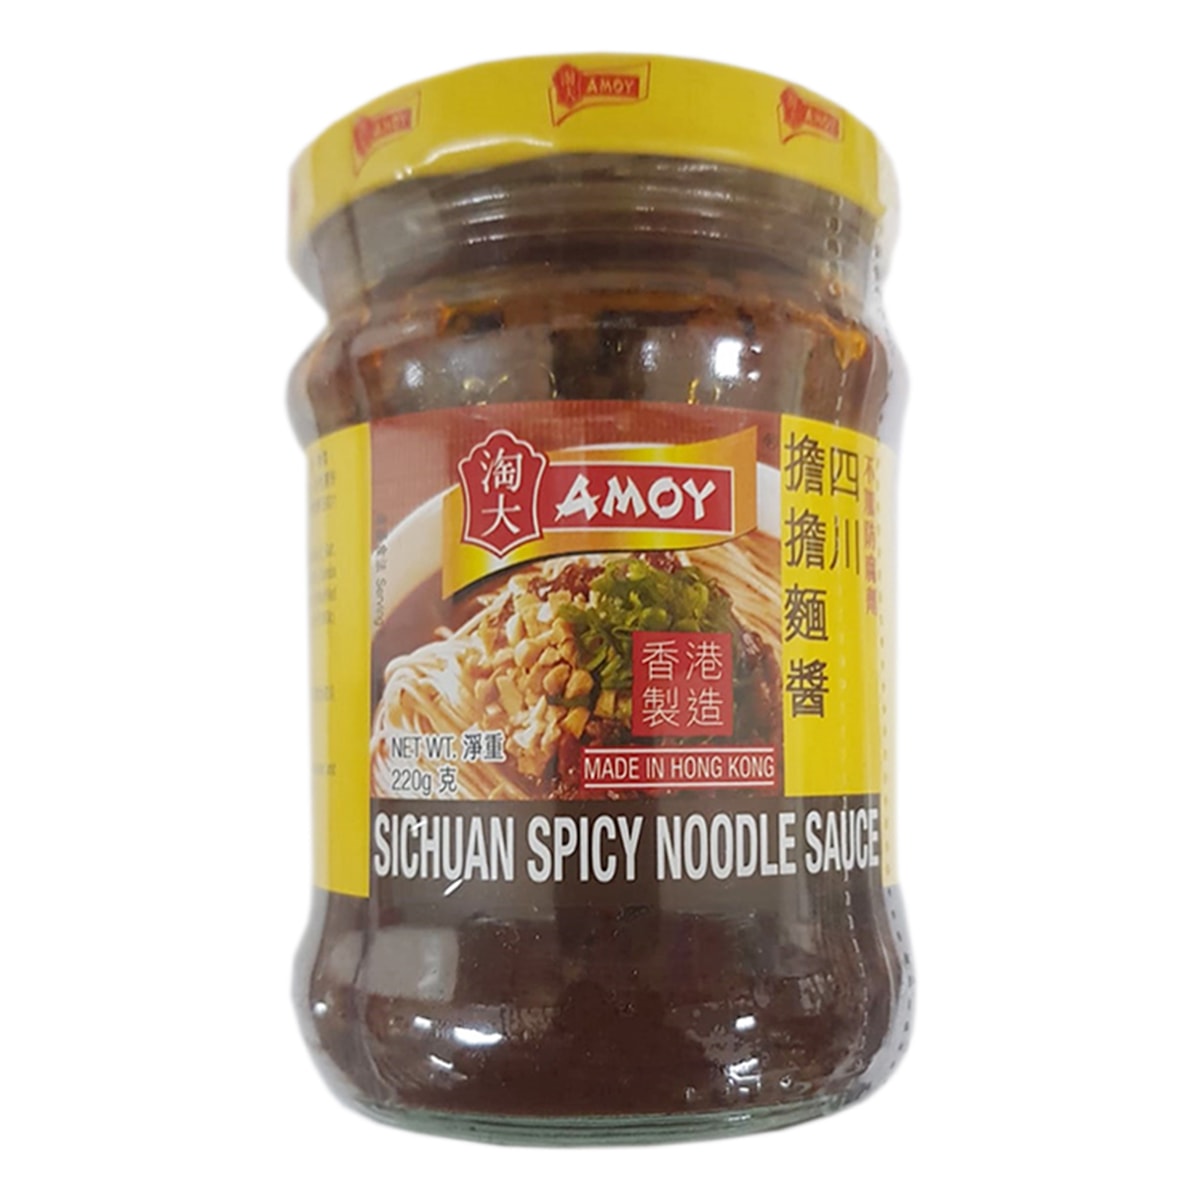 Buy Amoy Sichuan Spicy Noodle Sauce - 220 gm